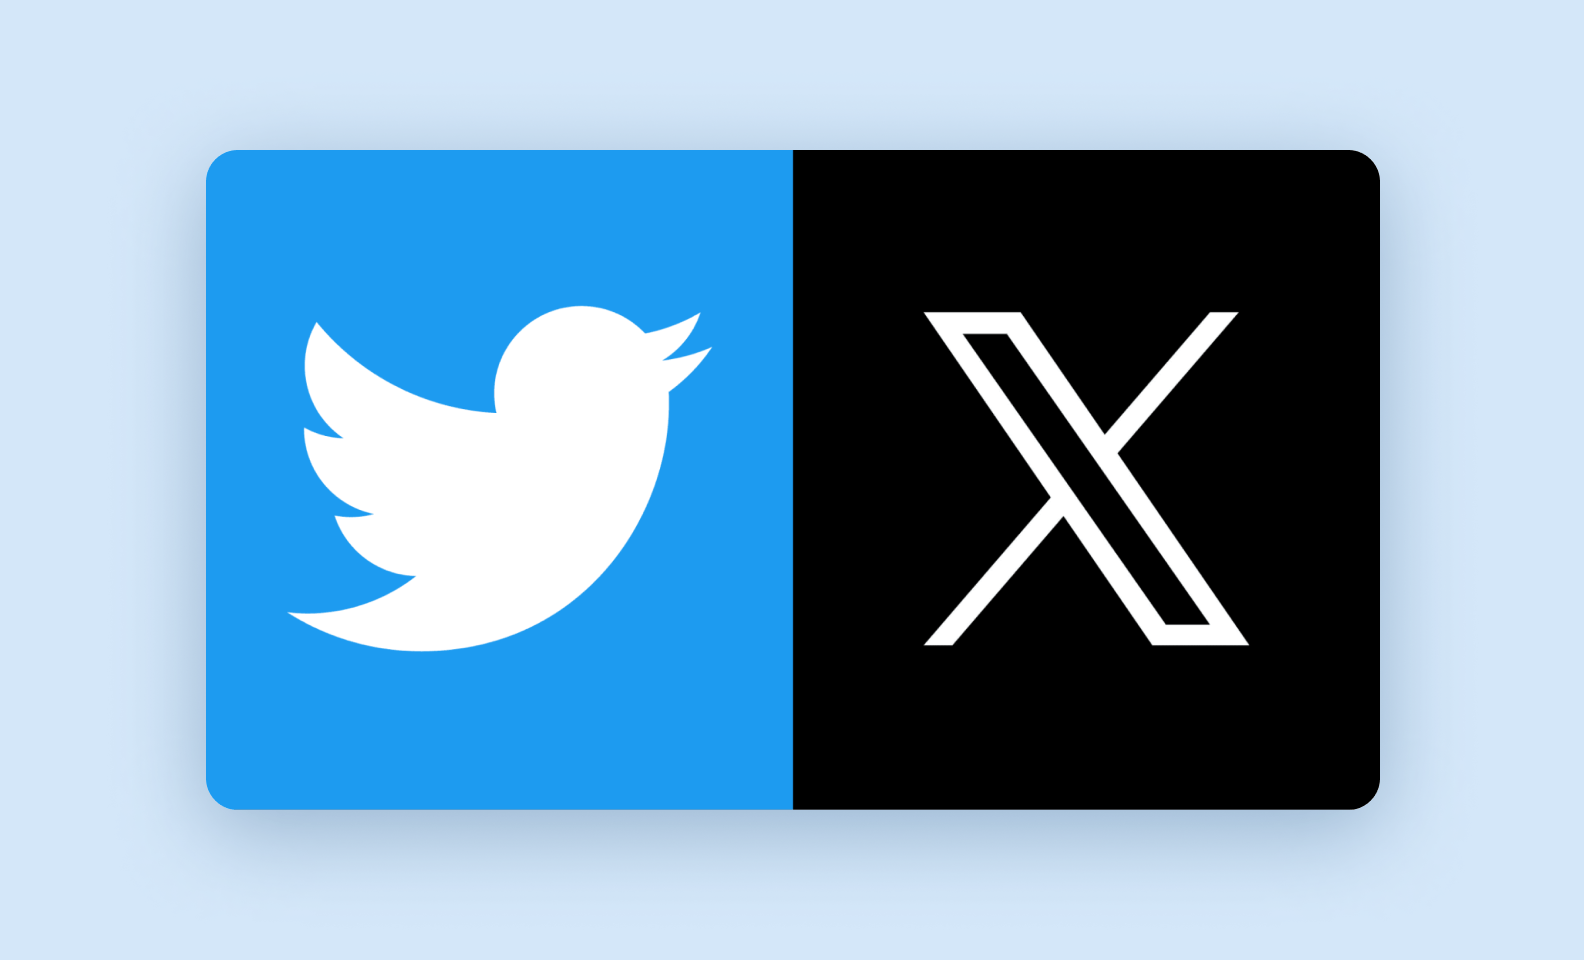 The old and new logo of Twitter/X